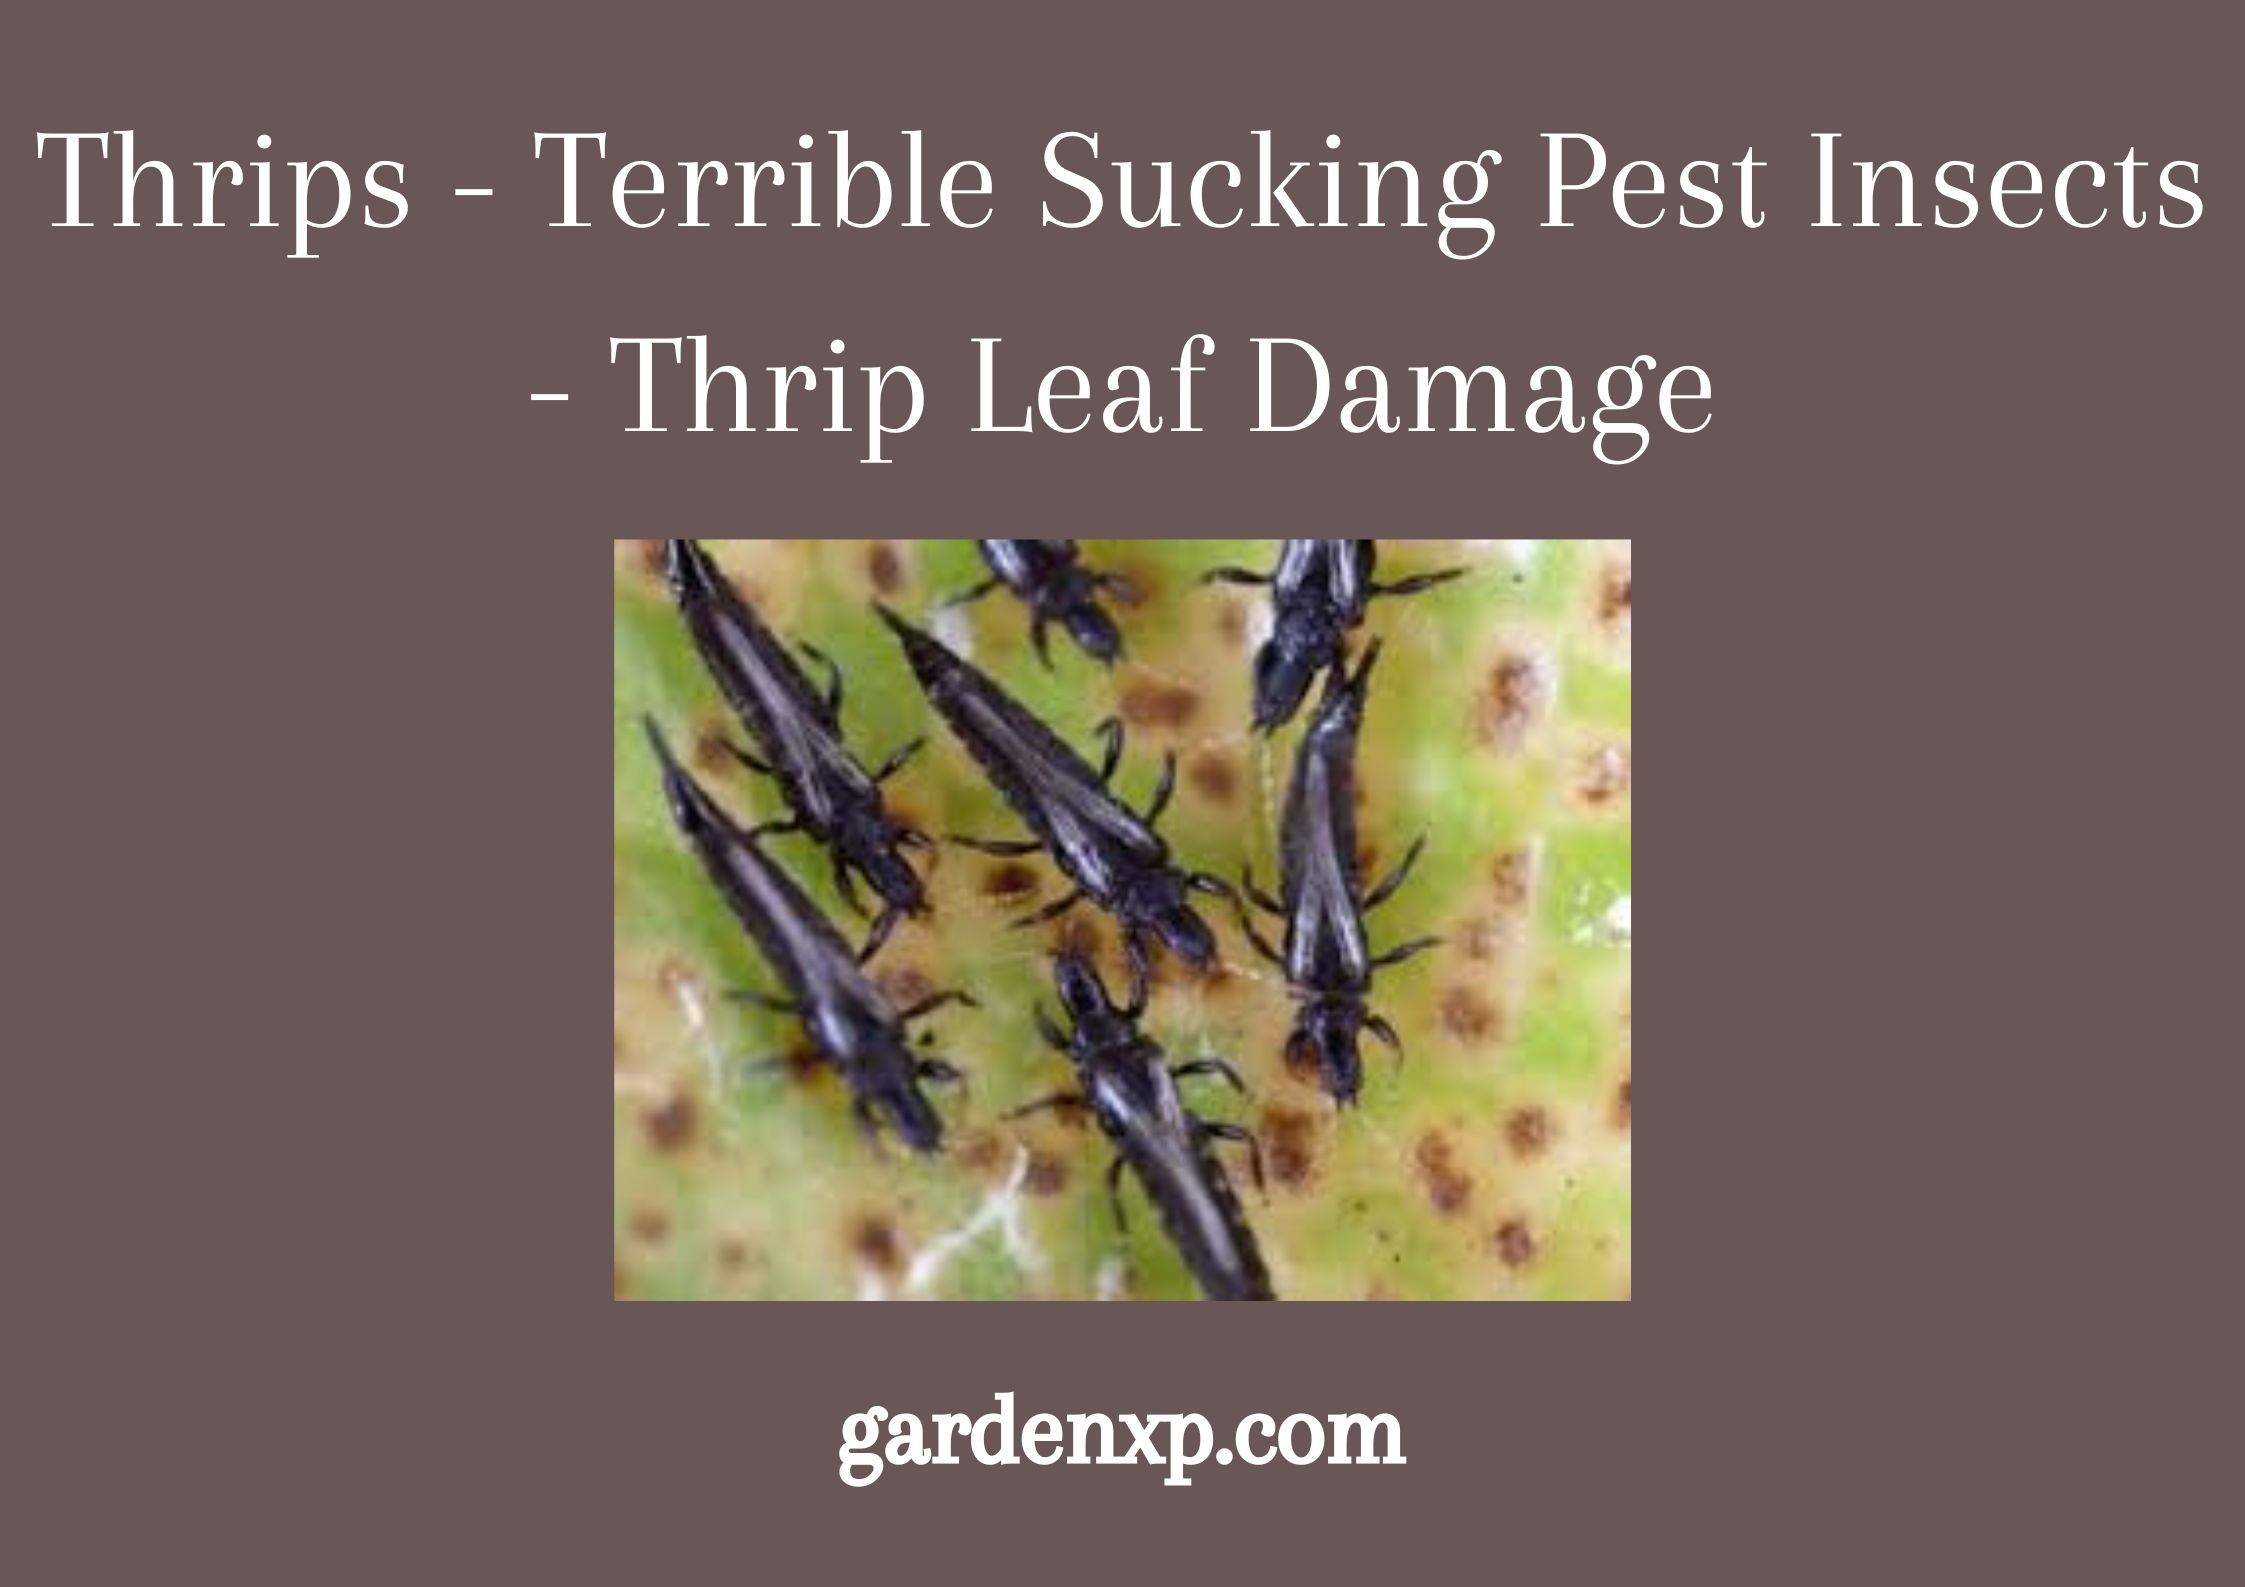 Thrips - Terrible Sucking Pest Insects - Thrip Leaf Damage